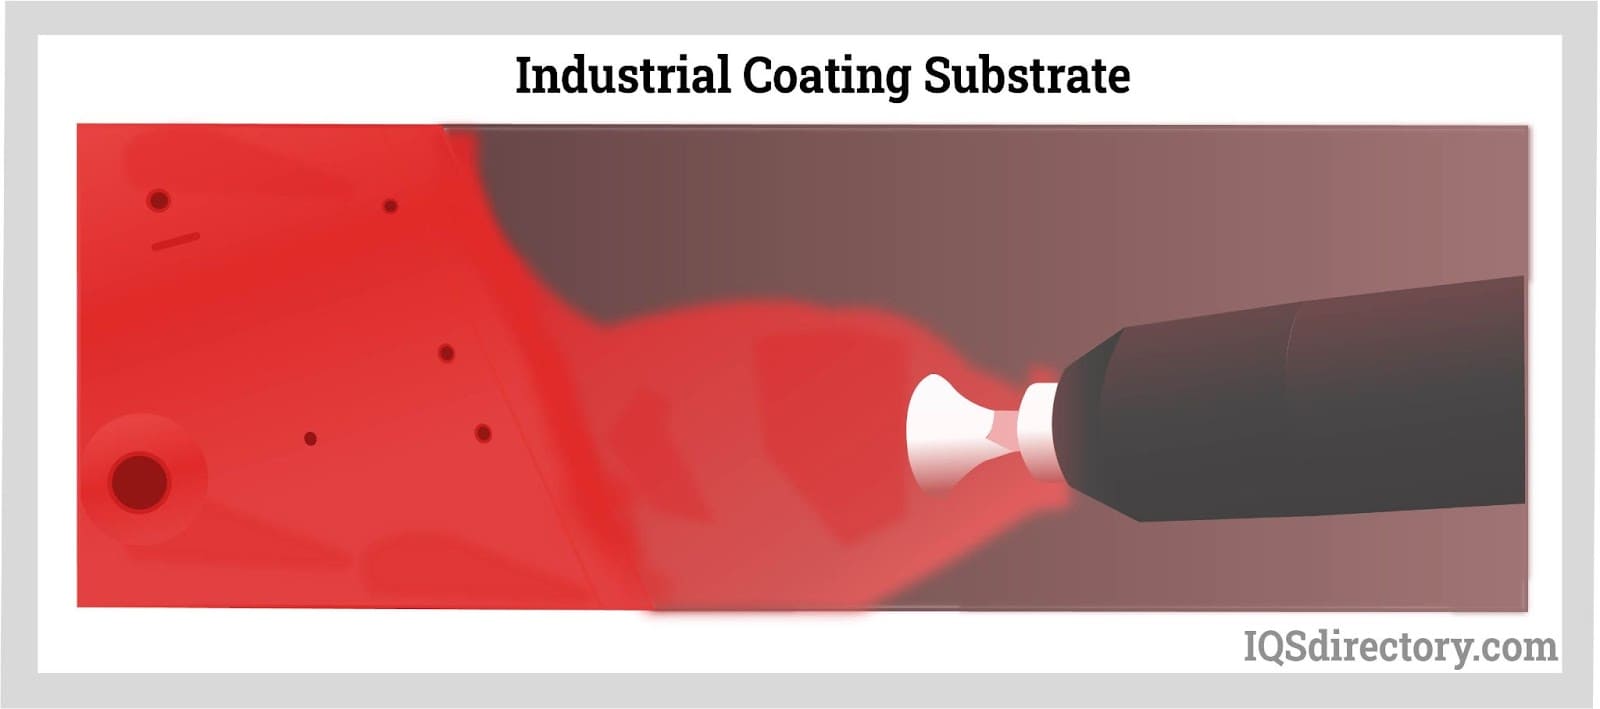 Industrial Coating Substrate